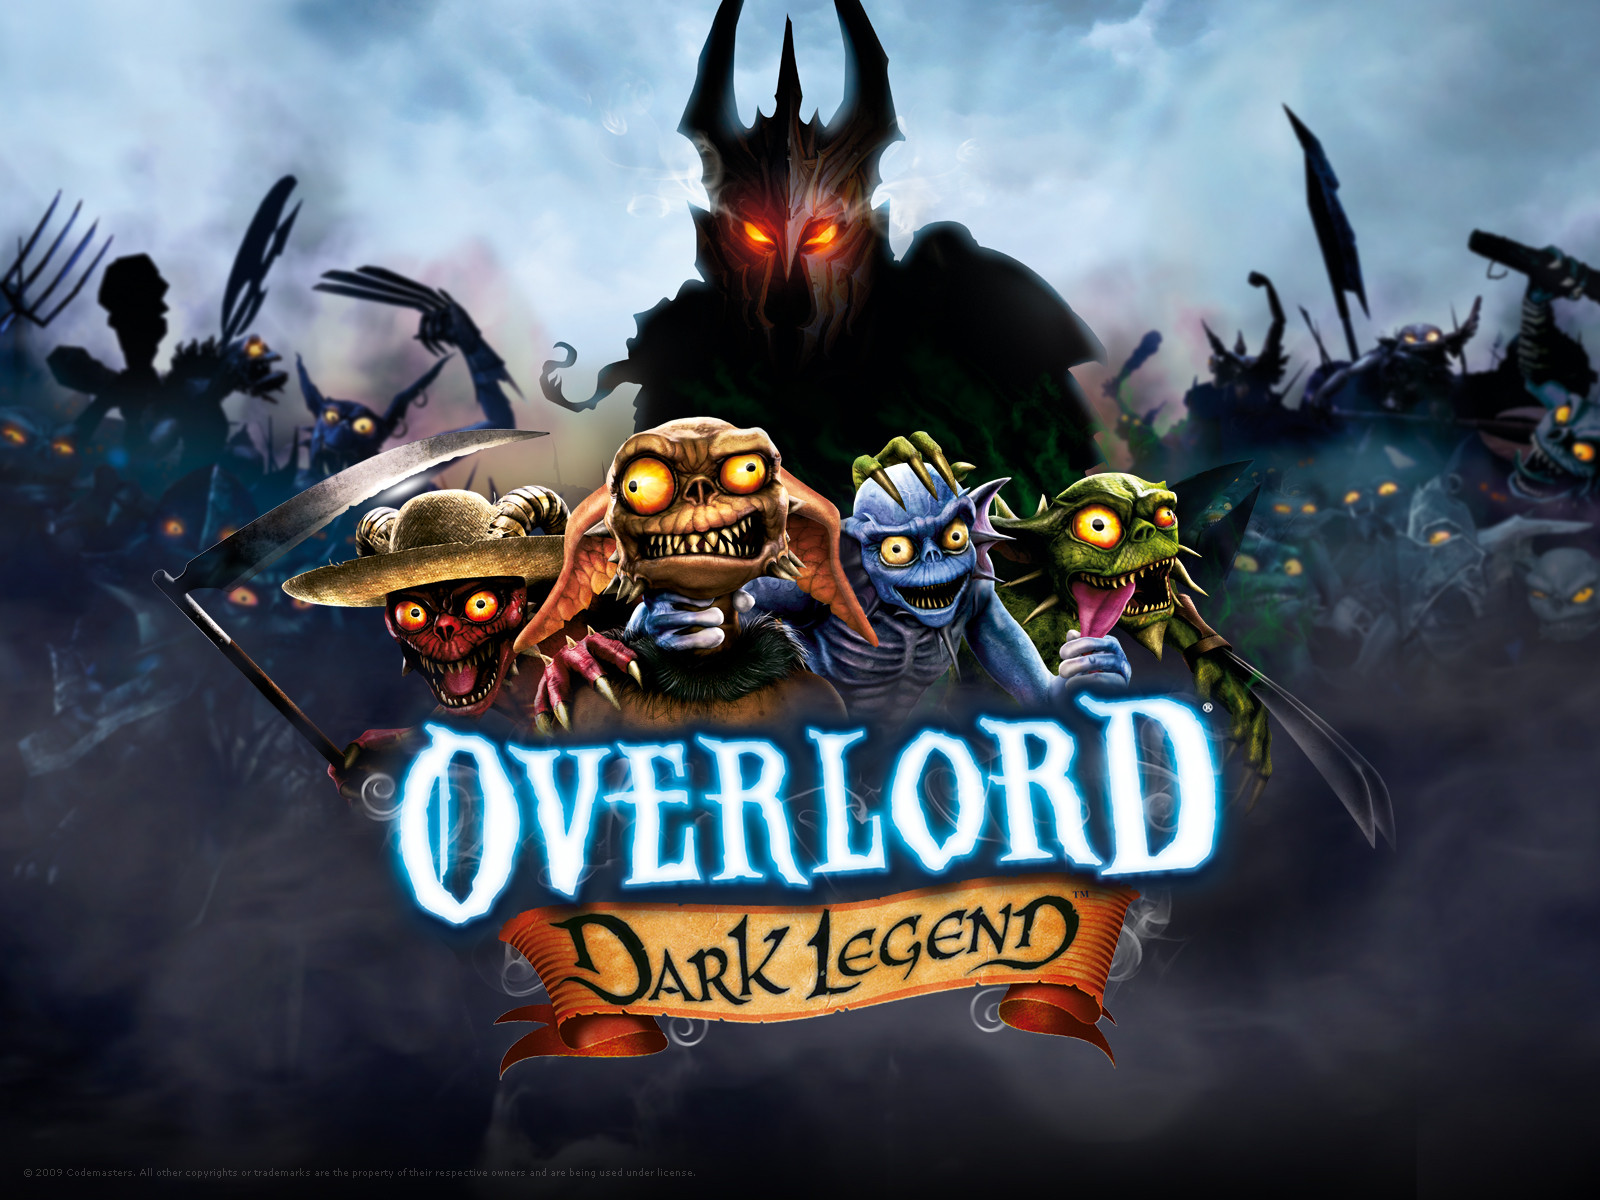 Video Game Overlord: Dark Legend HD Wallpaper | Background Image